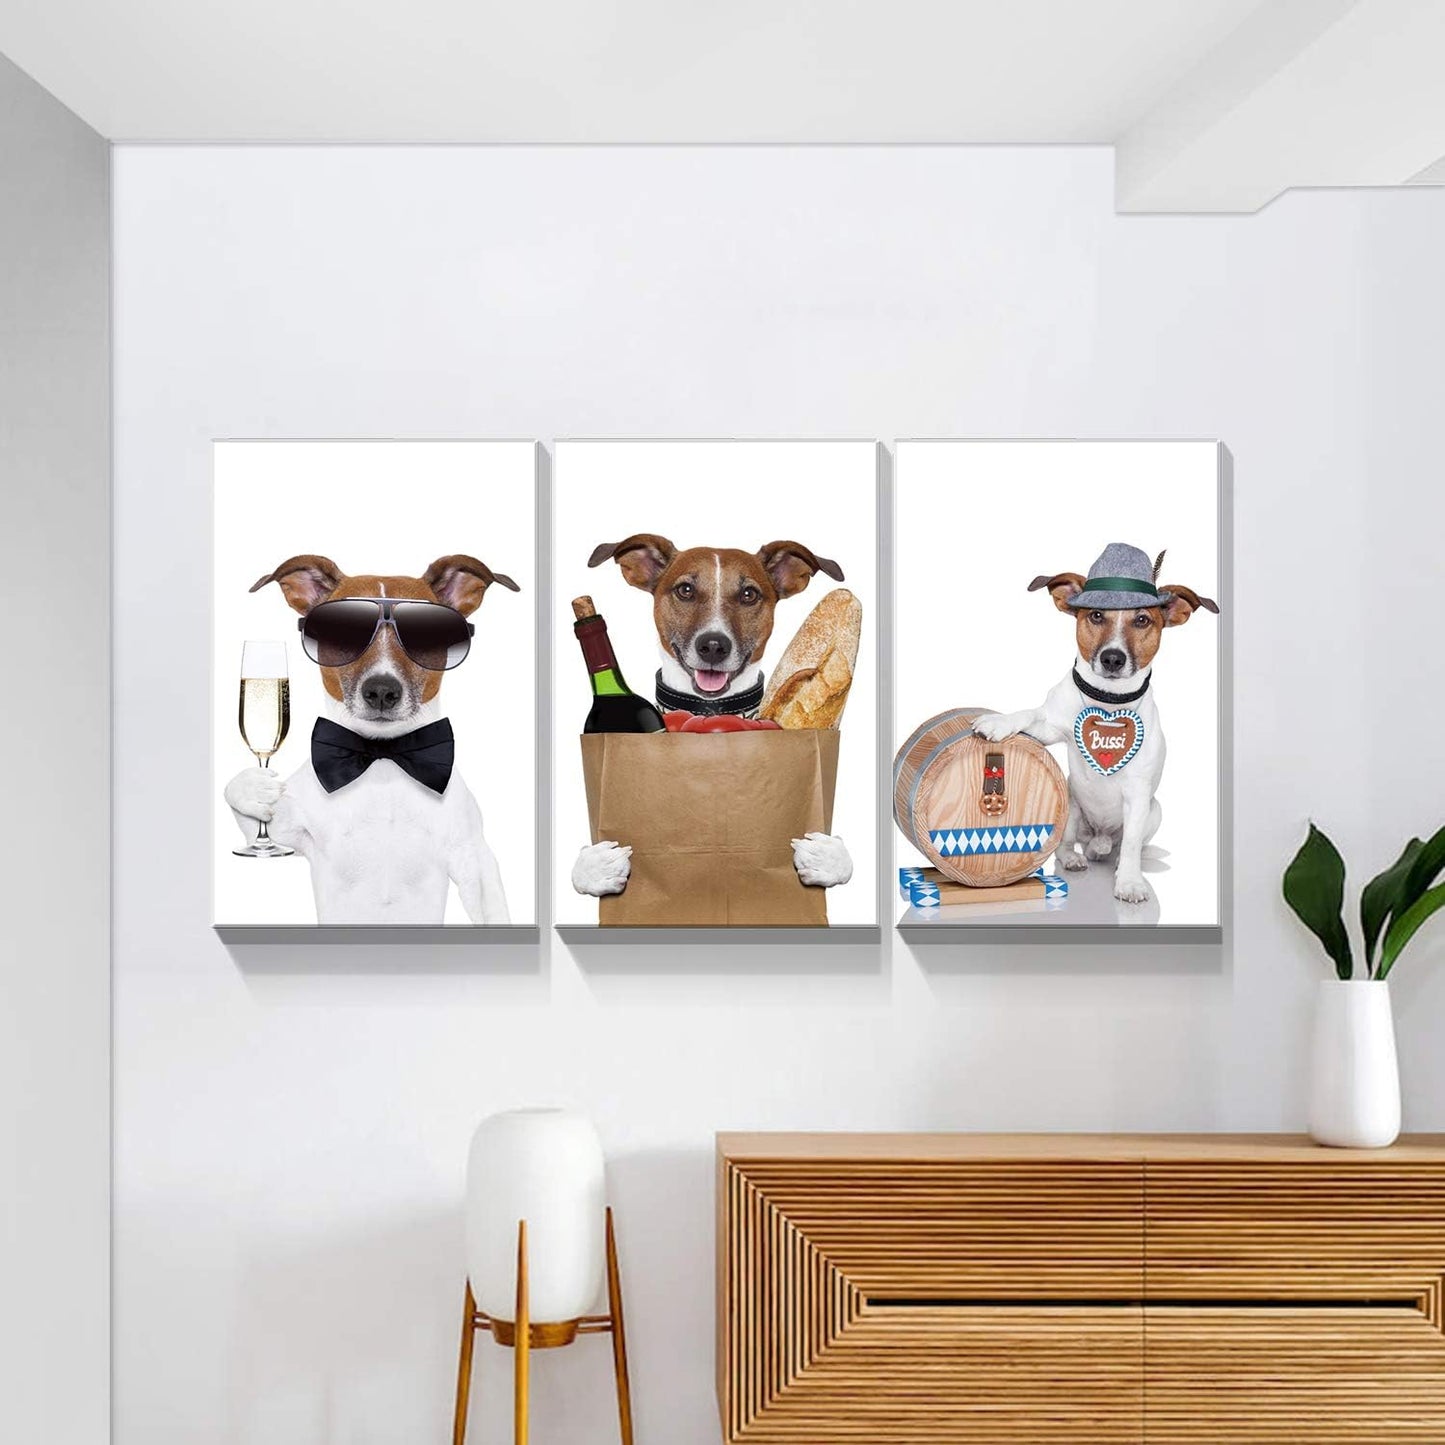 Looife 3 Panels Animal Canvas Wall Art, 32x48 Inch 3 Pieces Dogs with Wine Picture Prints Artwork Wall Decor, Gallery Wrapped Triptych Home Deco Set for Bedroom, Living Room